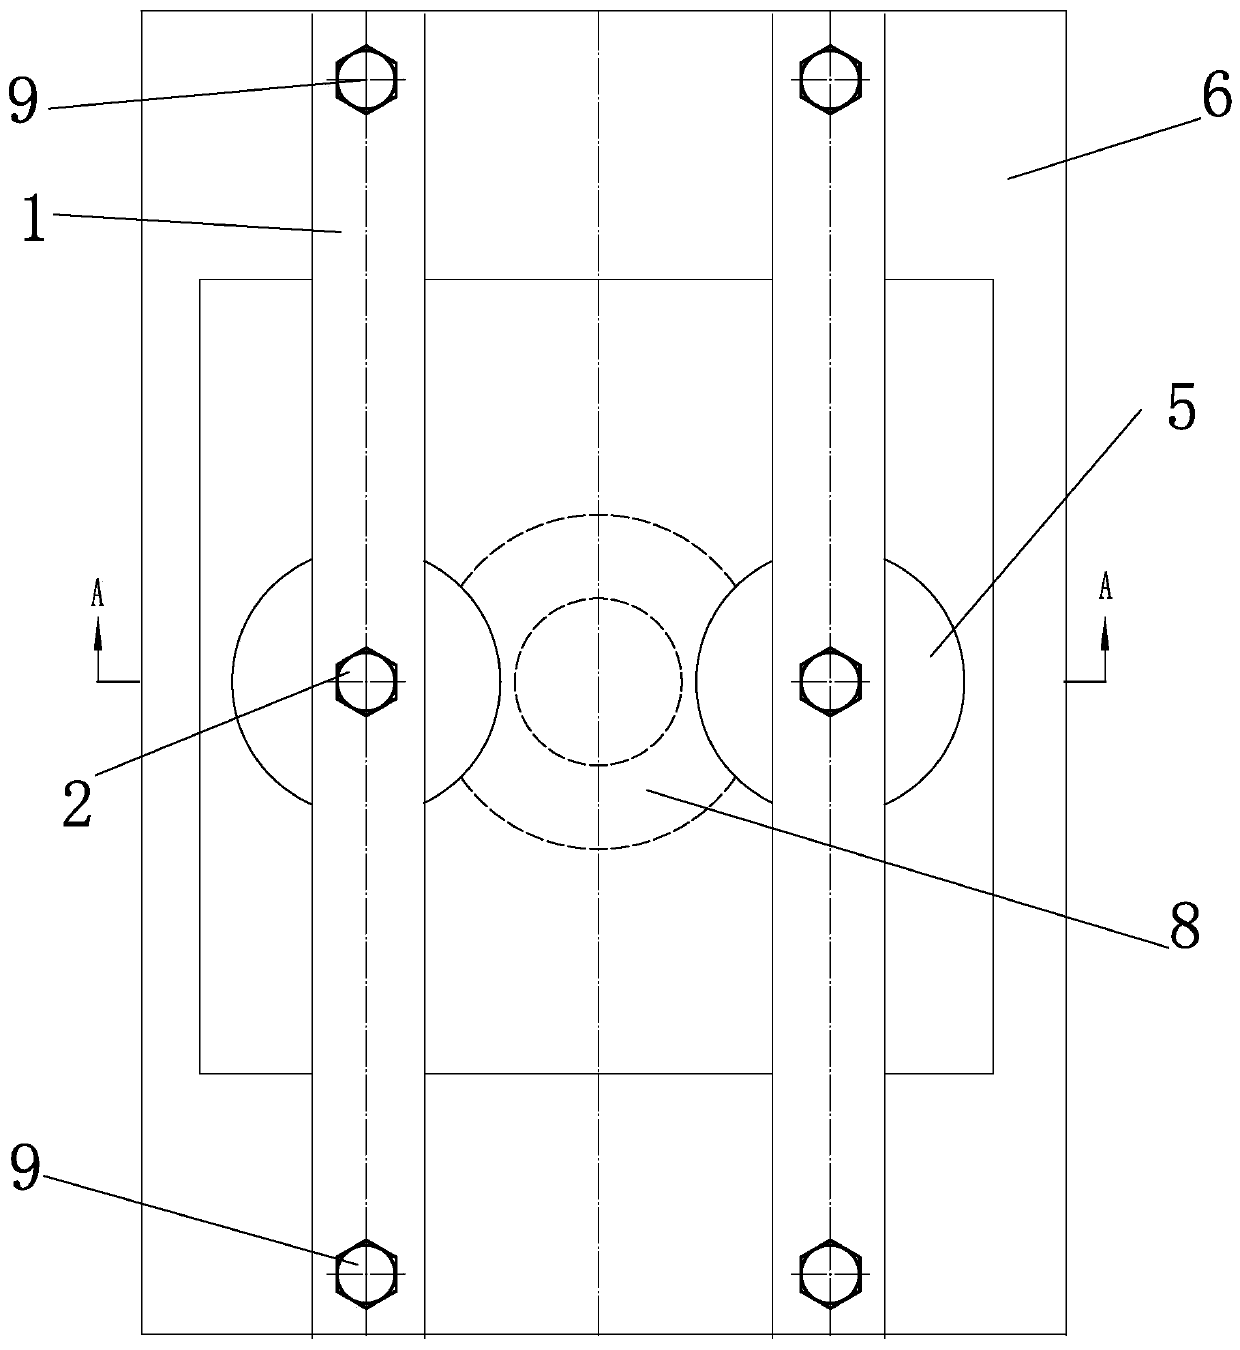 A Planar Electrode Structure Suitable for Surface Flashover in Vacuum